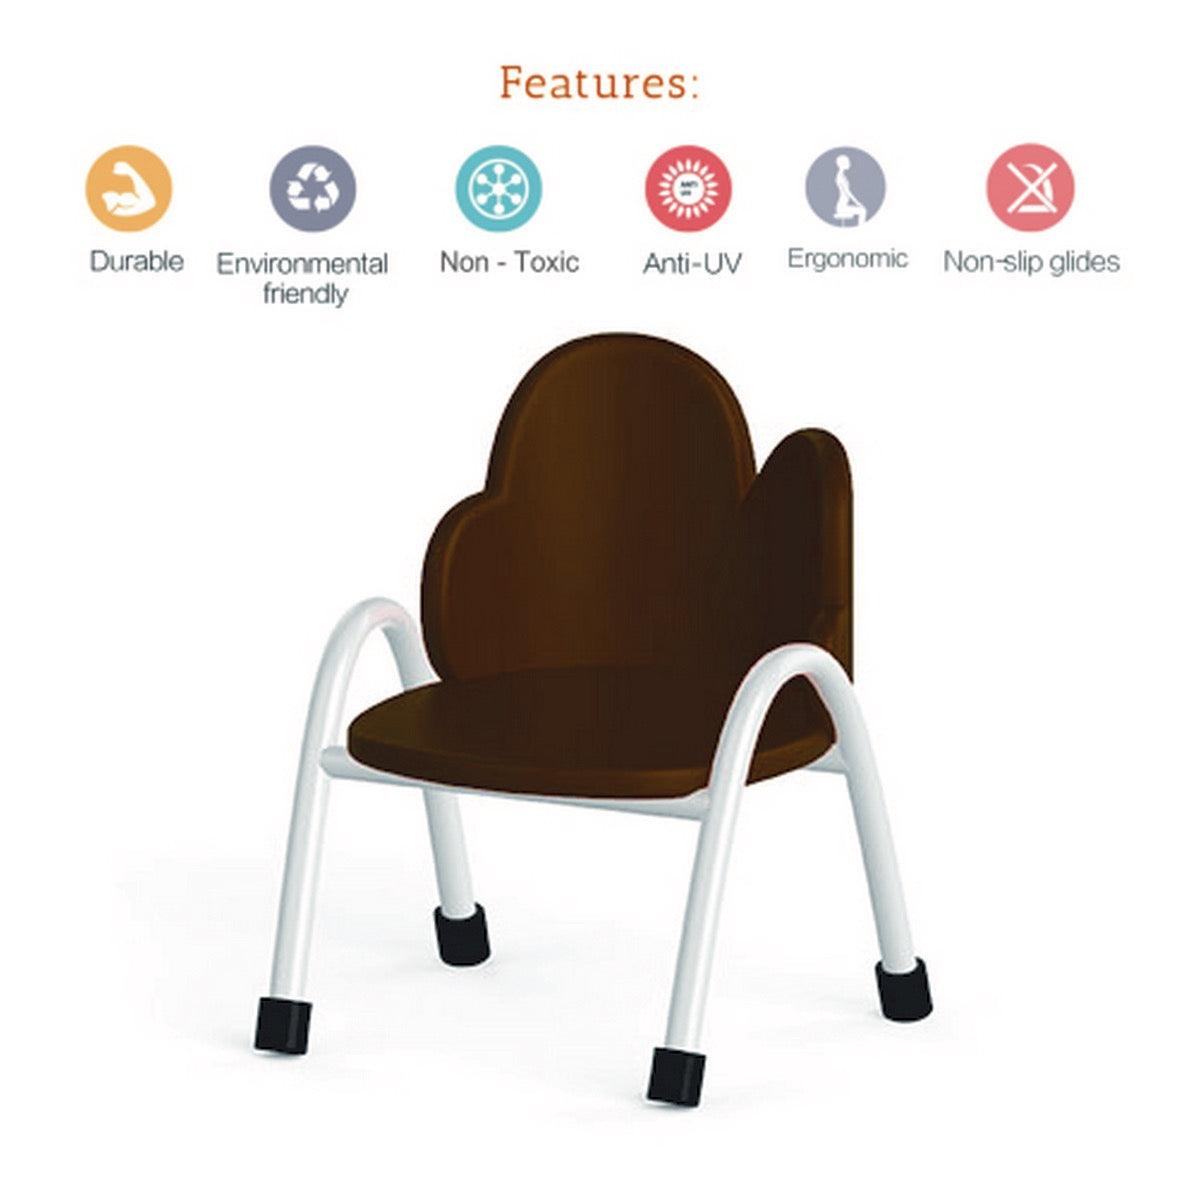 Ok Play Cloud Chair, Study Chair, Sturdy And Durable Chair, Plastic Chair, Perfect For Home, Creches And School, Brown, 2 to 4 Years, Height 8 Inches